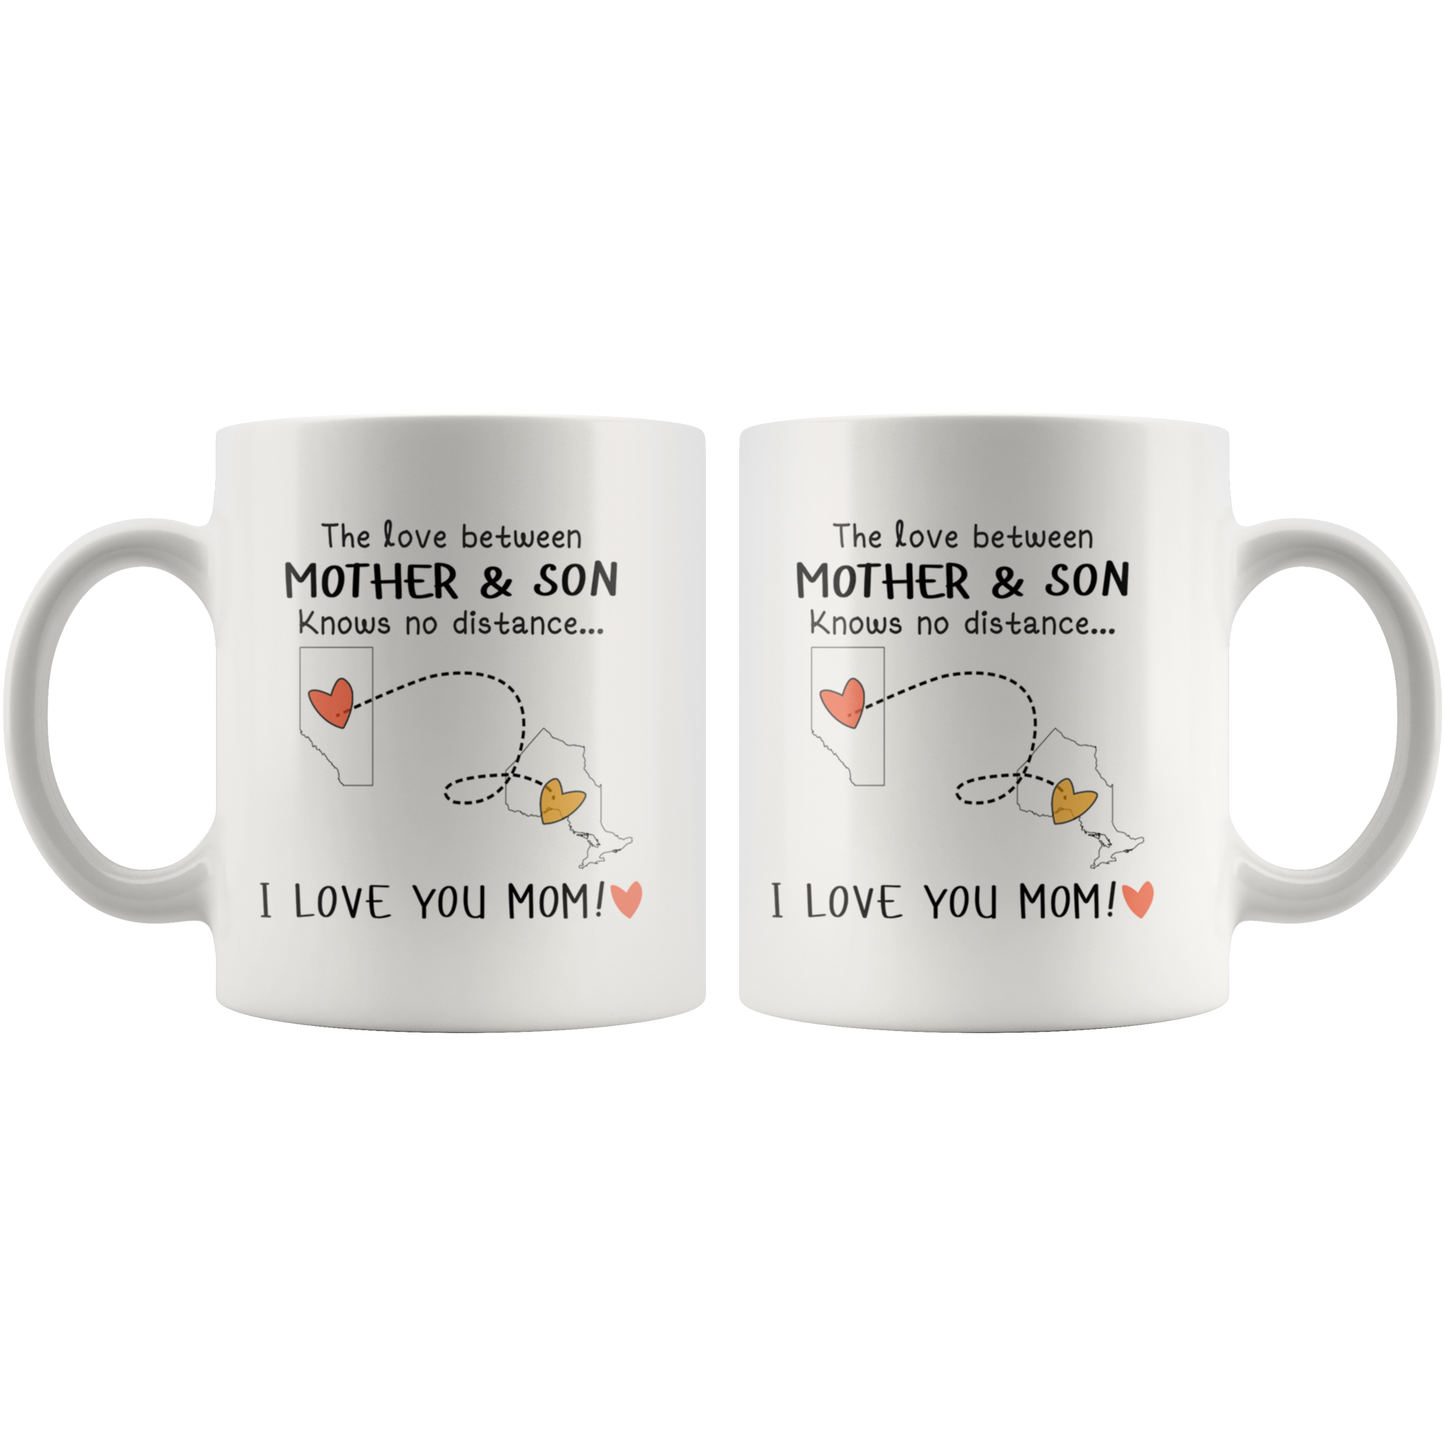 MUG0120547161-sp-24170 - [ Alberta | Ontario ]Mothers Day Gifts from Son - The Love Between Mother and So